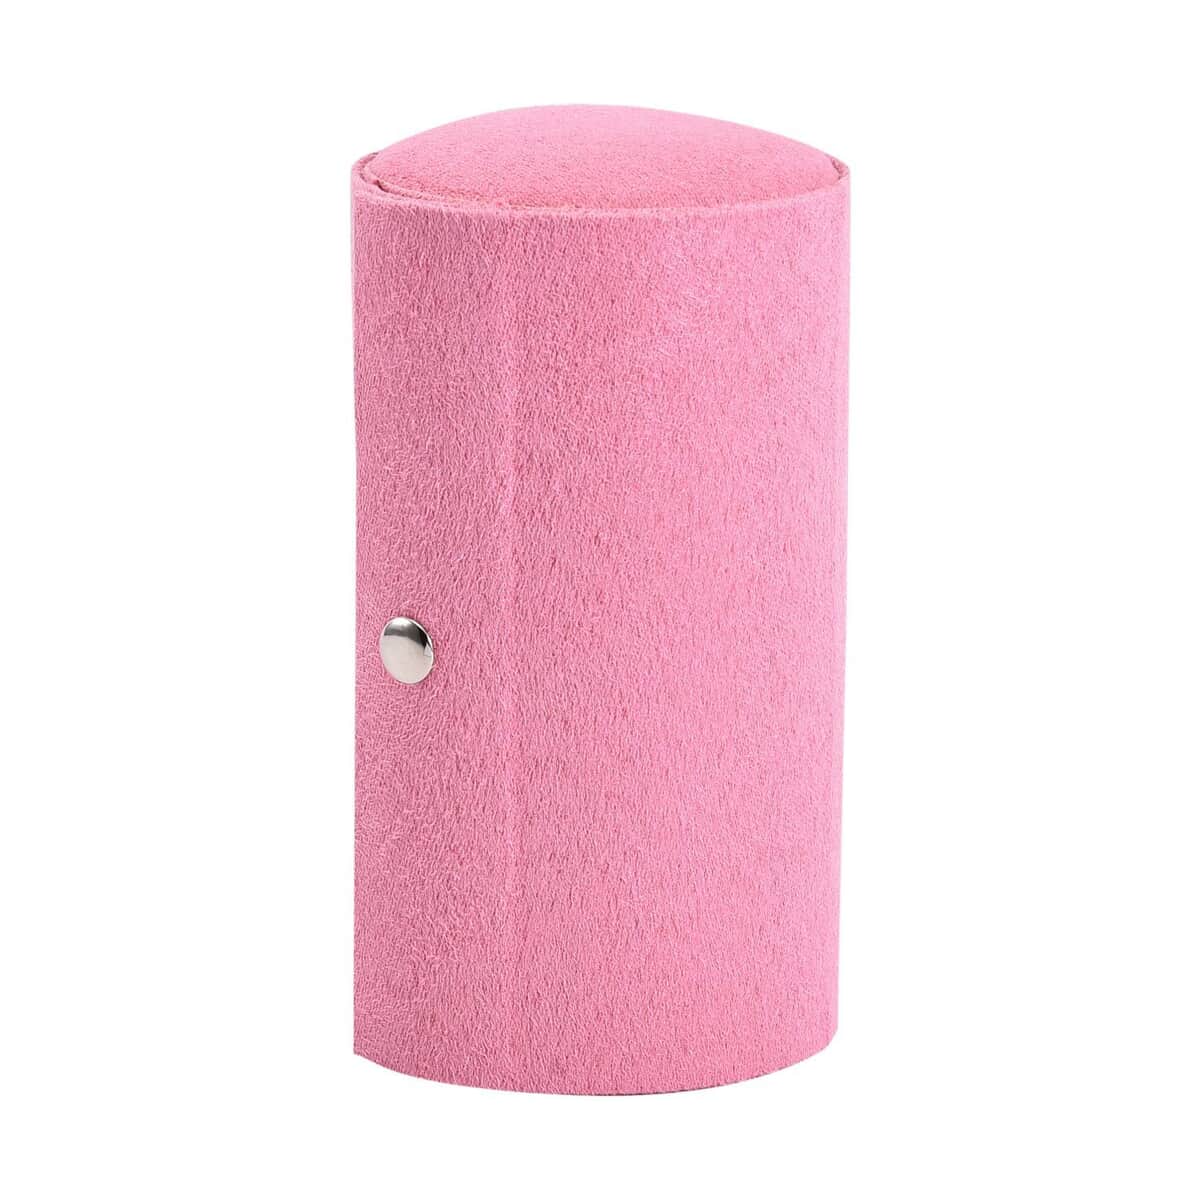 Pink Velvet Three Layer Cylinder Shape Jewelry Box with Top Cap and Snap Button Closure (5.1"x3"x3") image number 5